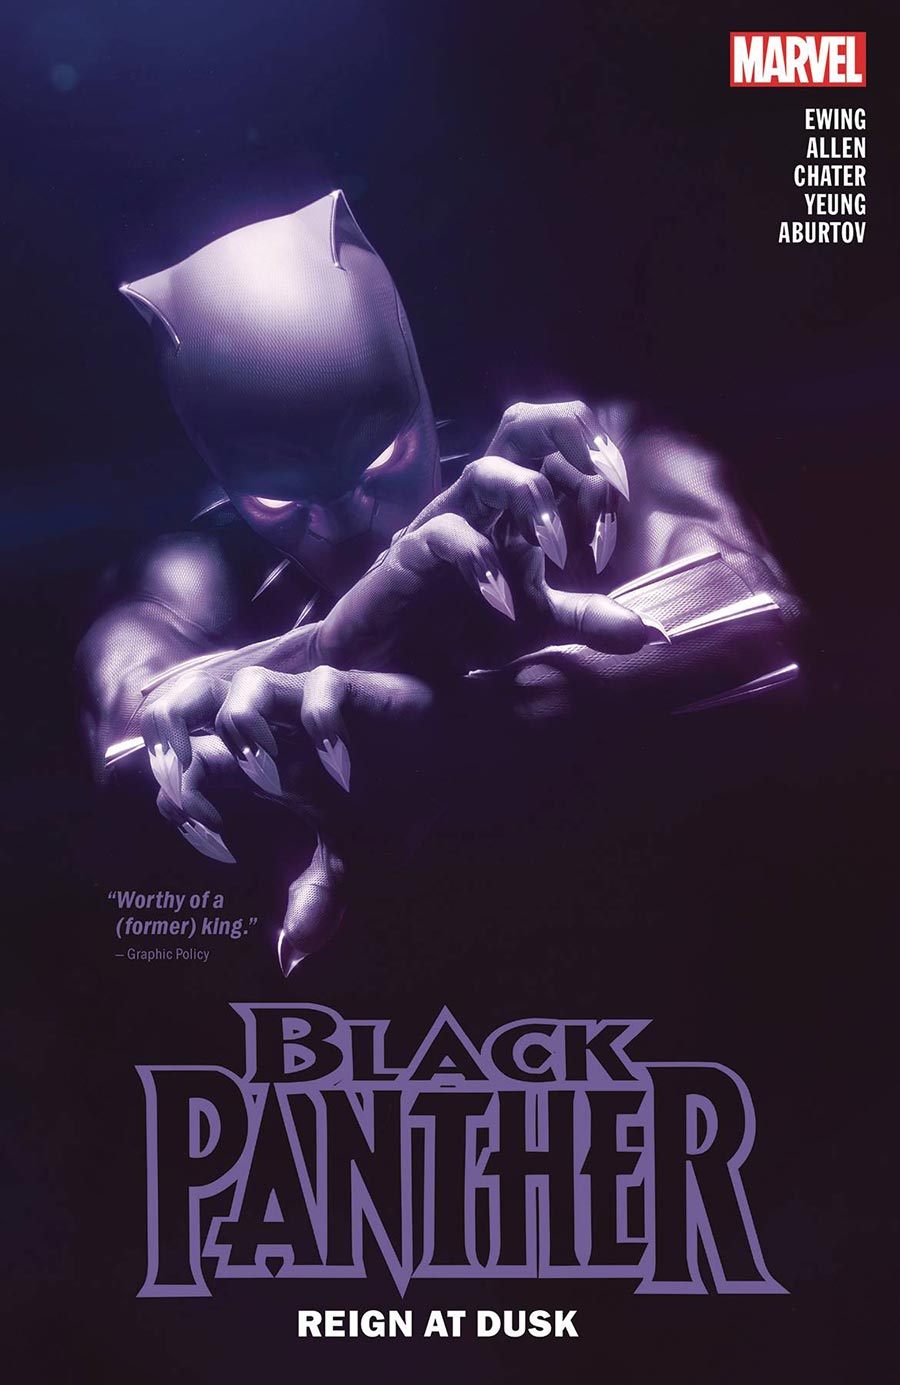 Black Panther By Eve L Ewing Reign At Dusk Vol 1 TP